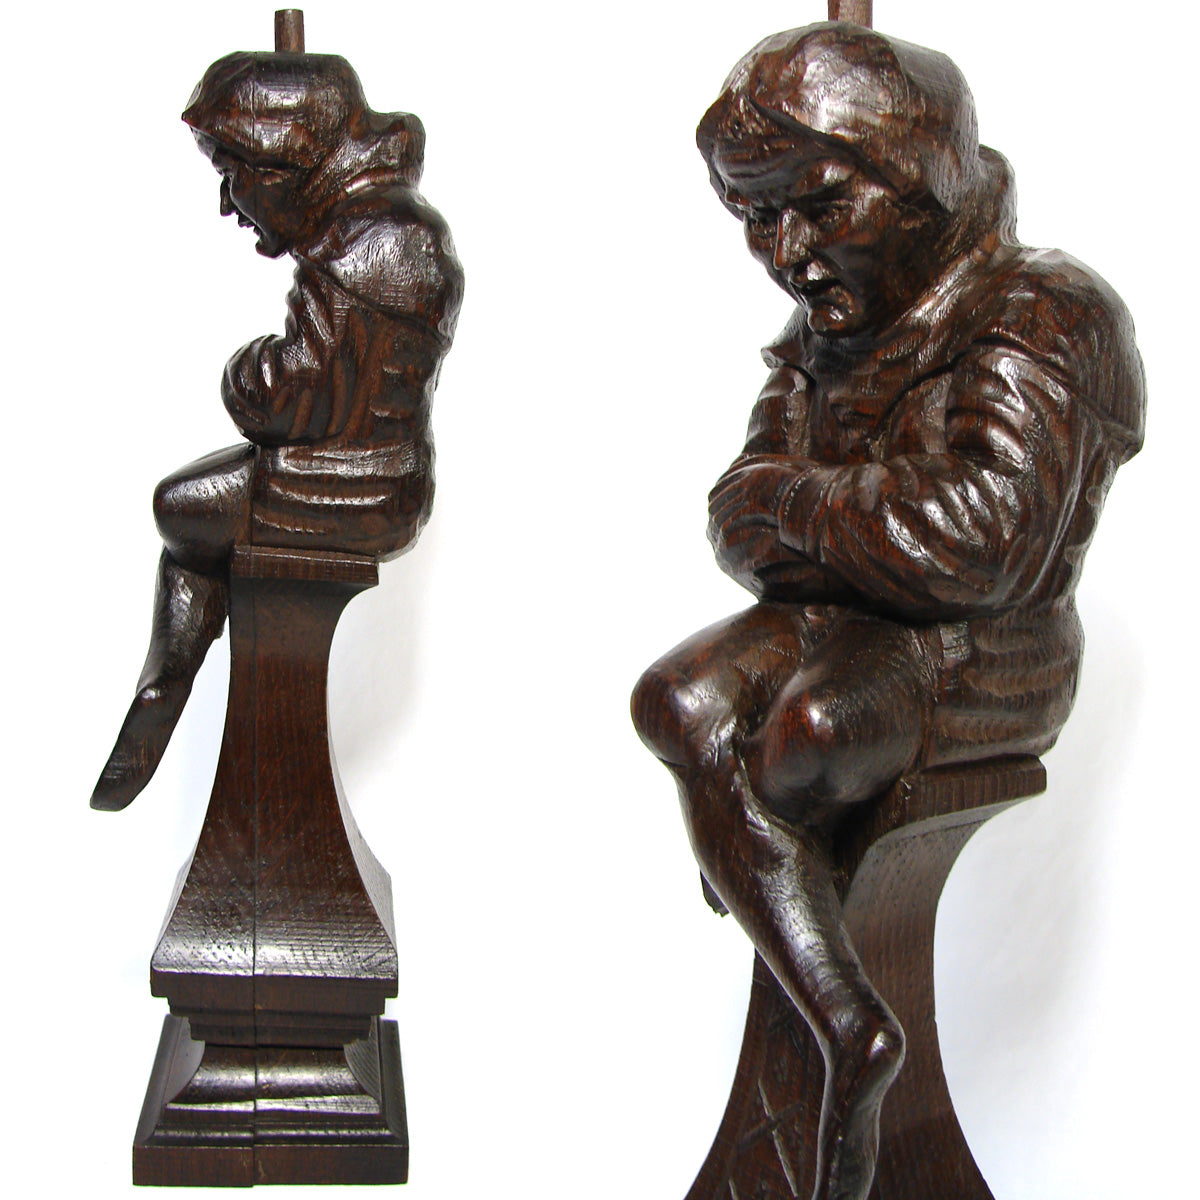 Antique French Carved 14” Furniture or Architectural Support, Pillar, Jester or Gnome Figure